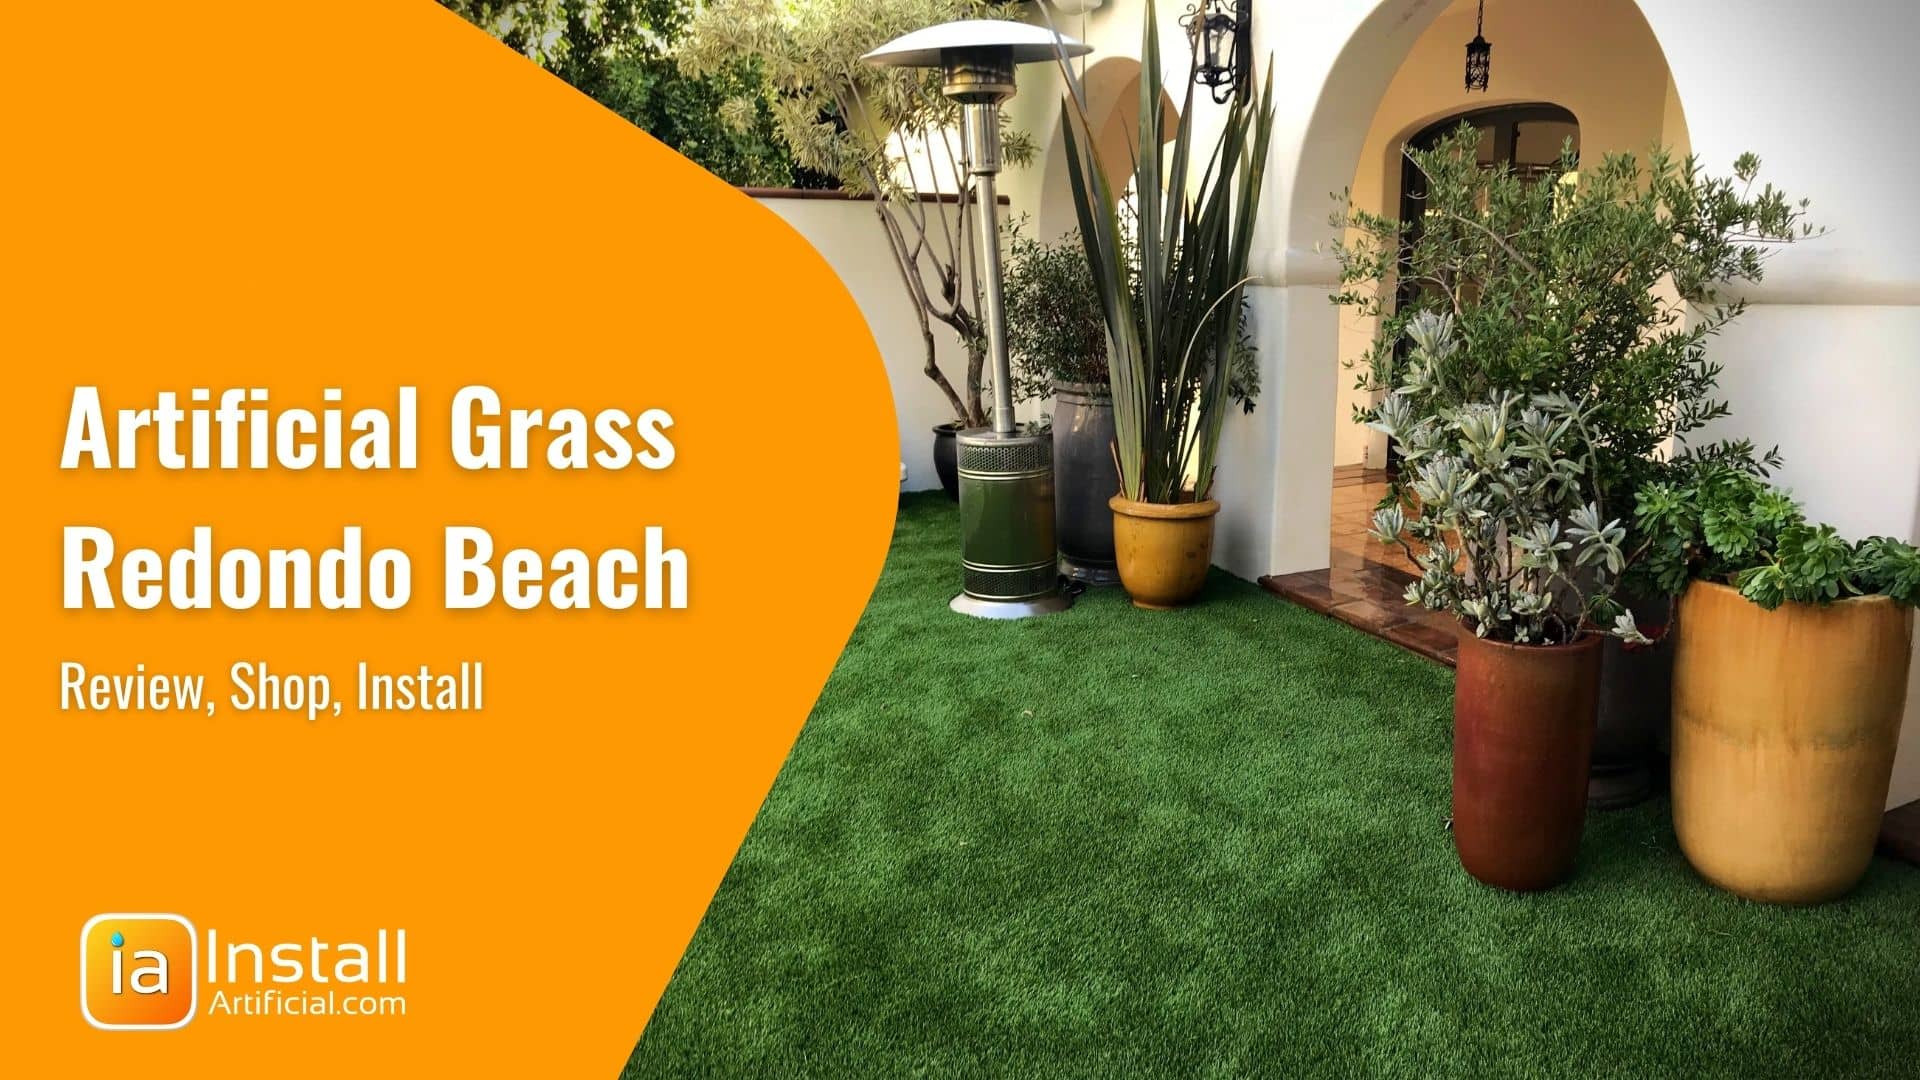 What's the Price of Artificial Grass in Redondo Beach?